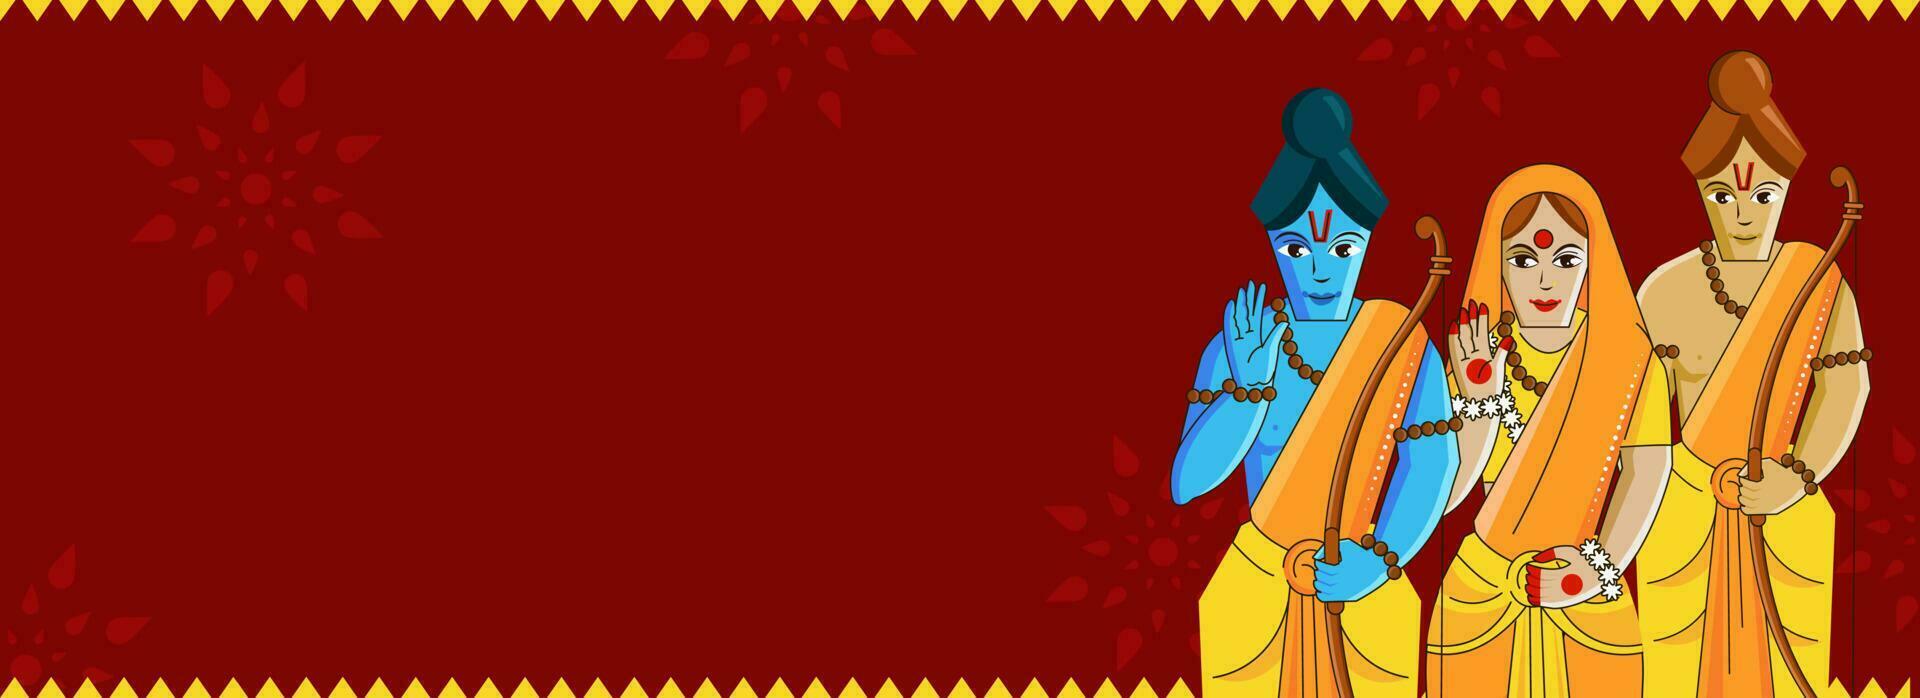 Hindu Mythology Lord Rama With His Wife, Brother Lakshman Character And Copy Space On Red Background. vector